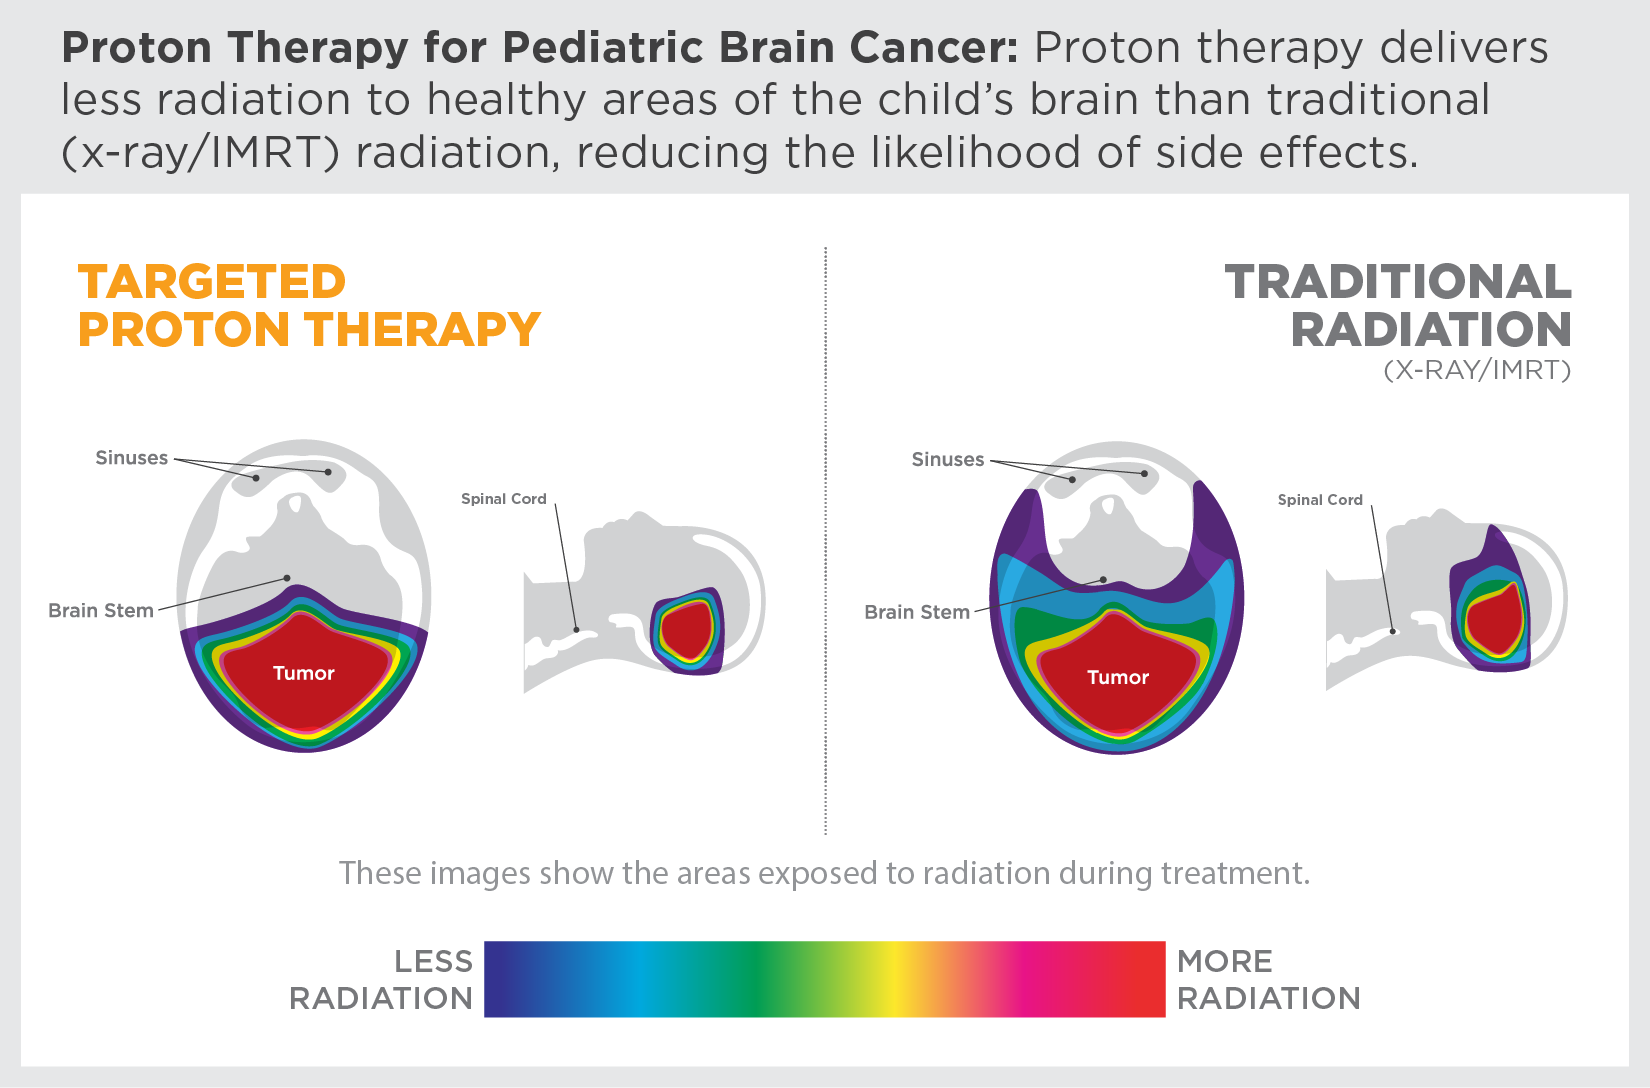 Proton therapy delivers less radiation to healthy areas of the brain, reducing the likelihood of side effects.